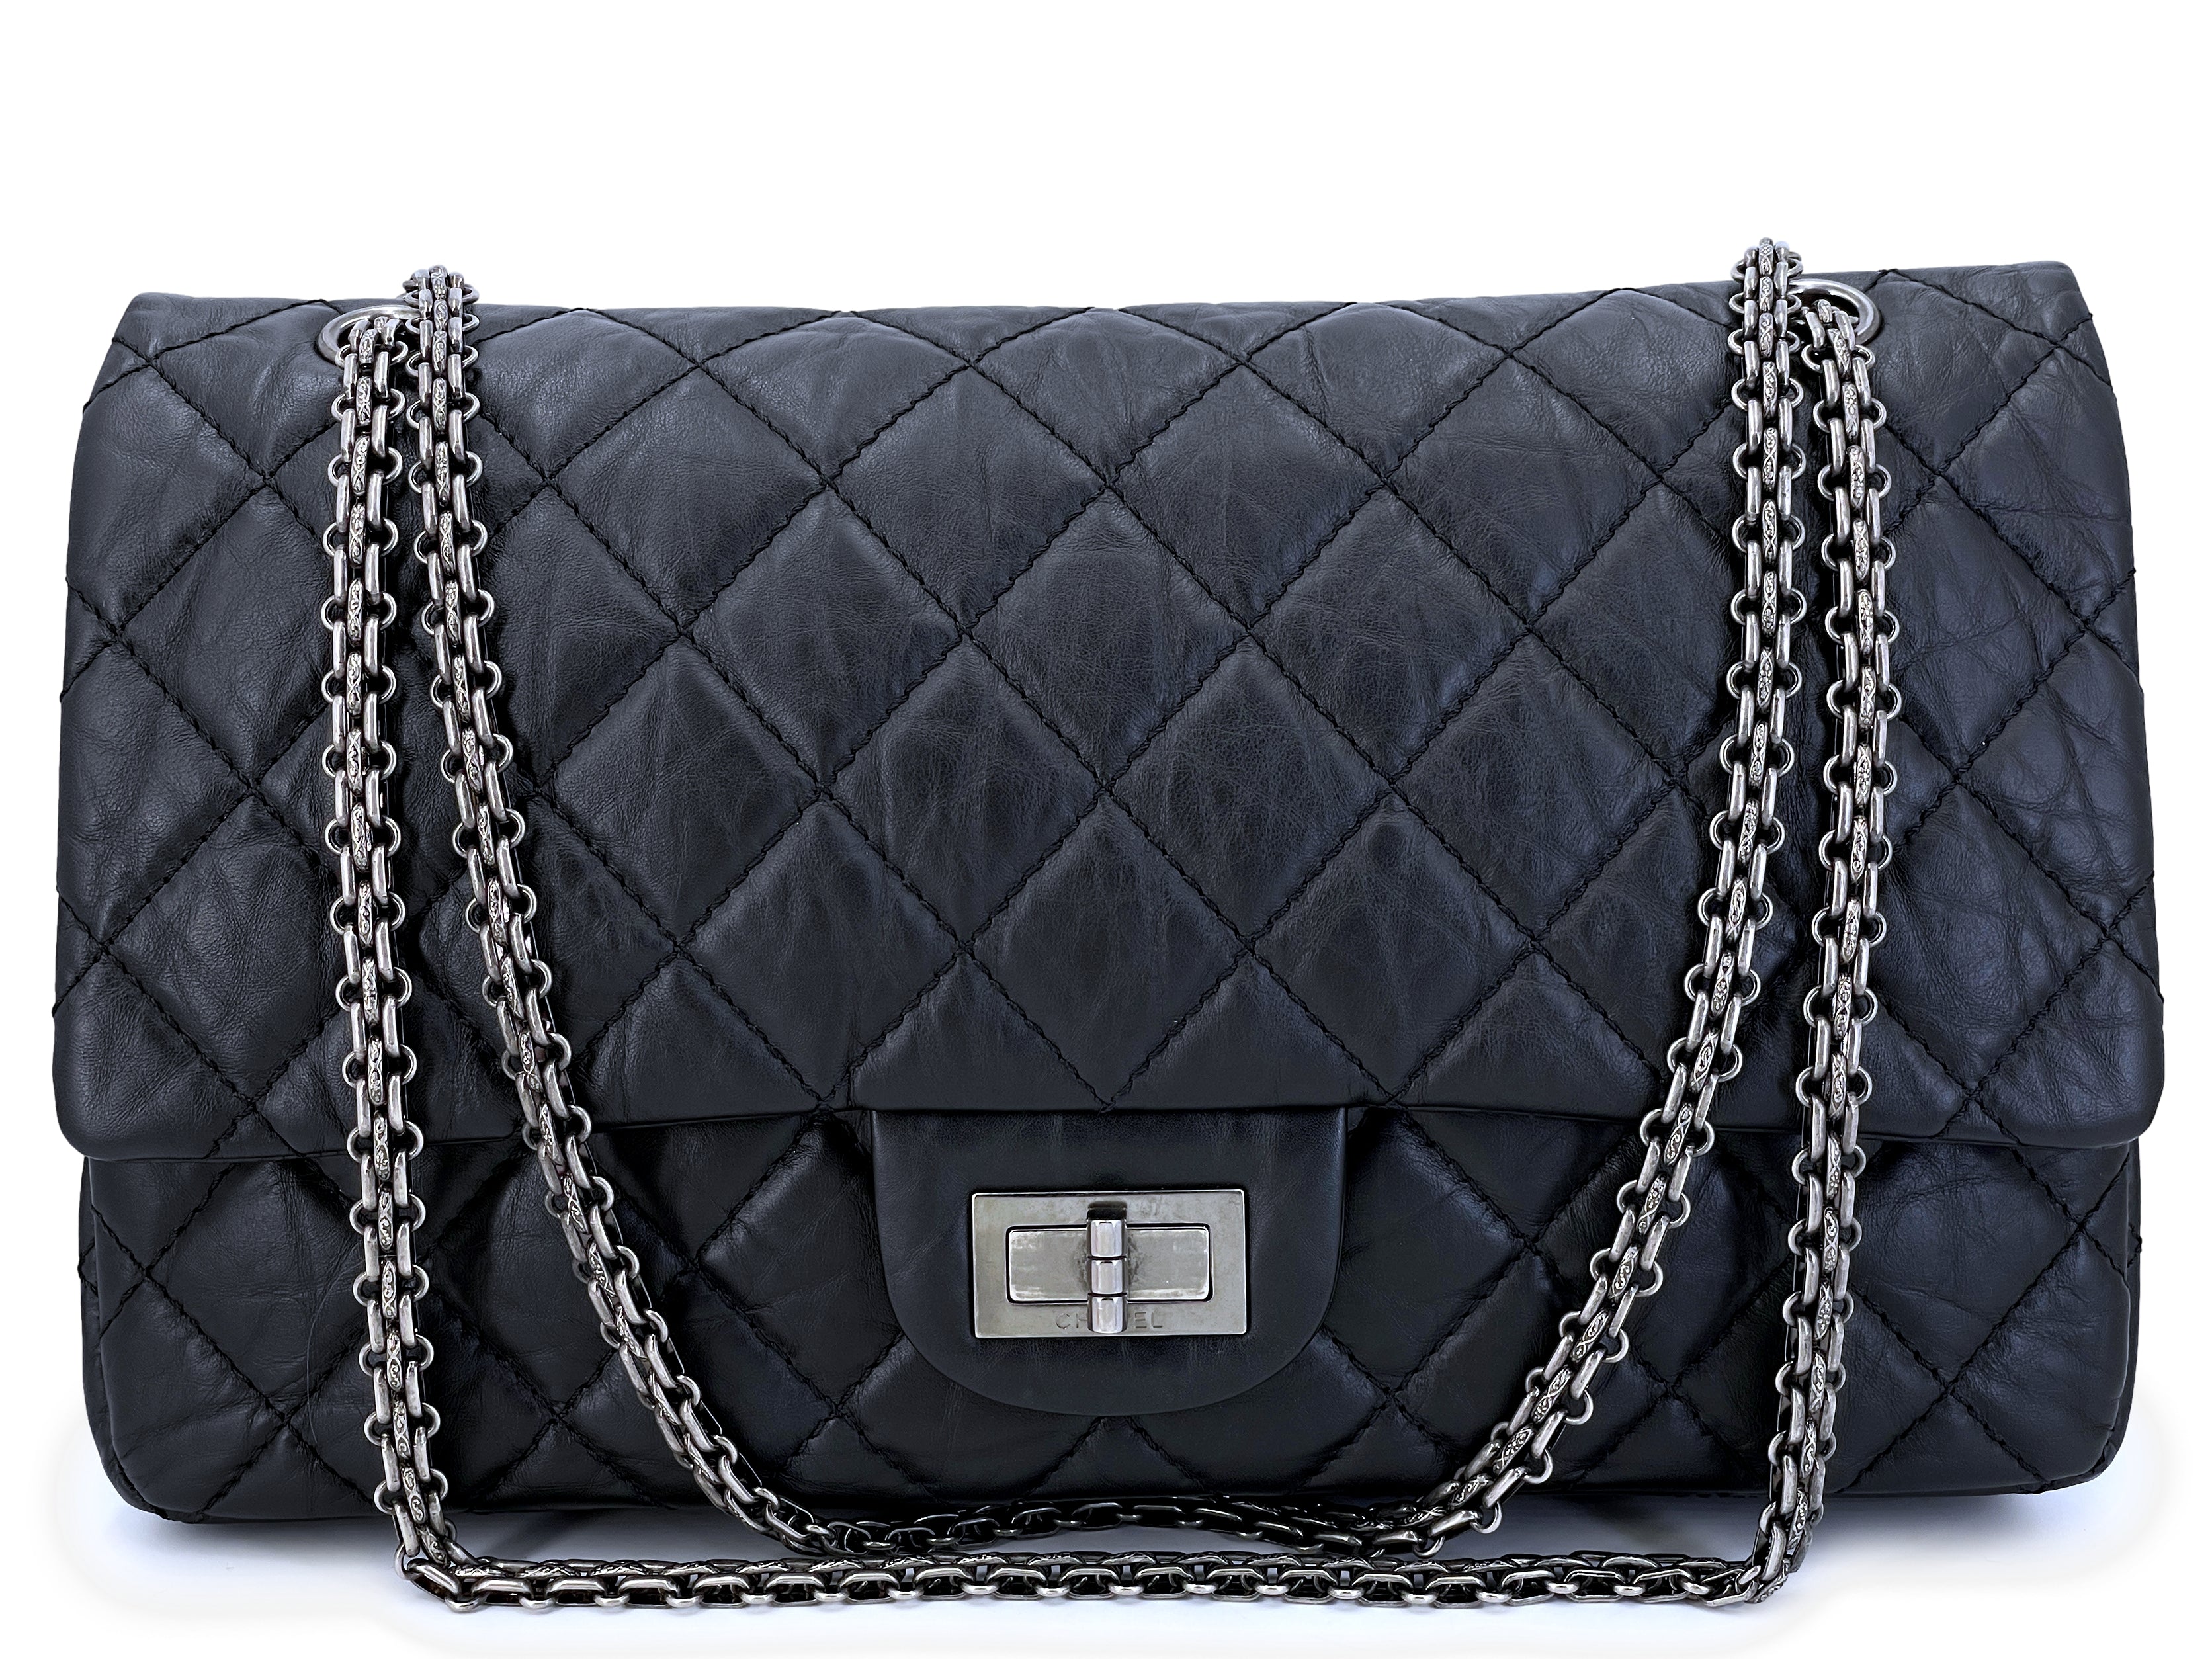 Chanel Reissue 227 Maxi 2.55 Flap in Black Aged Calfskin with Ruthenium  Hardware - SOLD